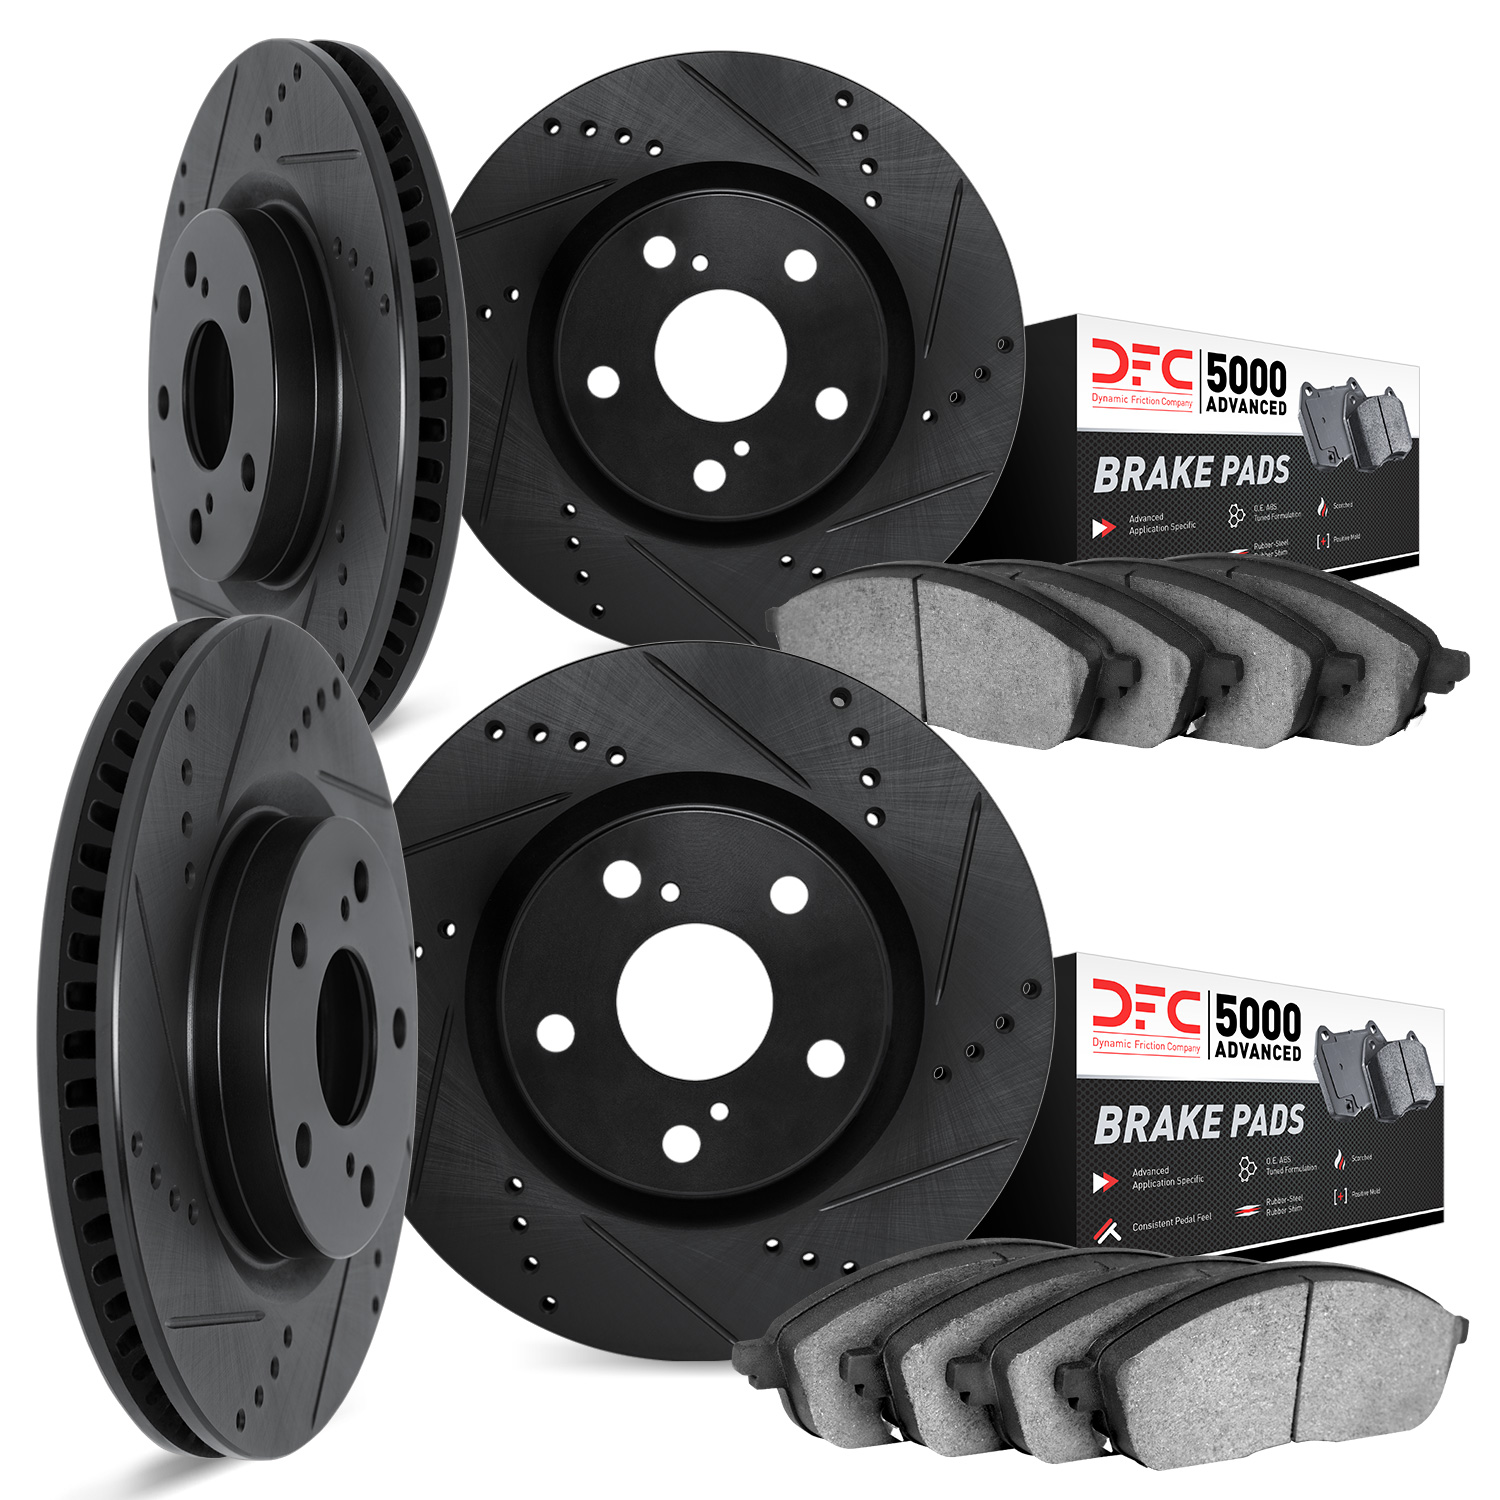 8504-74065 Drilled/Slotted Brake Rotors w/5000 Advanced Brake Pads Kit [Black], 2004-2005 Audi/Volkswagen, Position: Front and R